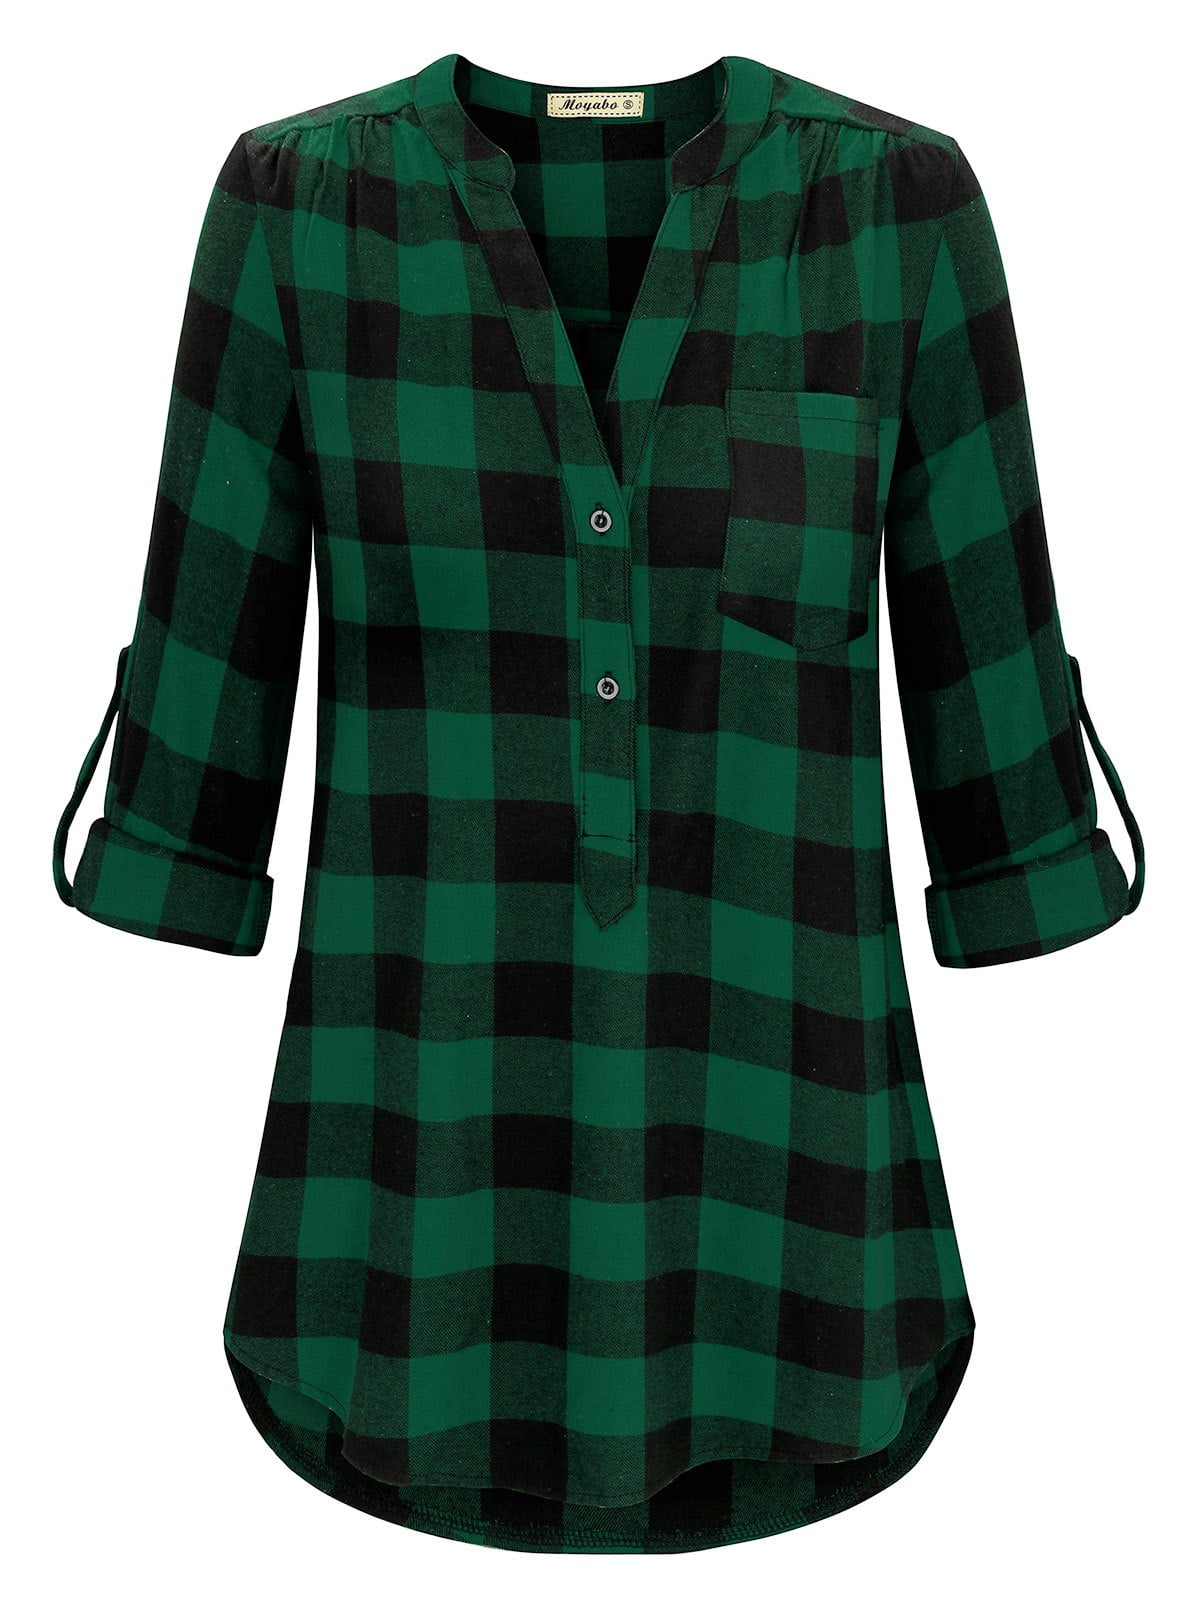 ADREAMLY Flannel Plaid Shirt for Women 3/4 Sleeve V Neck Tunic Tops ...